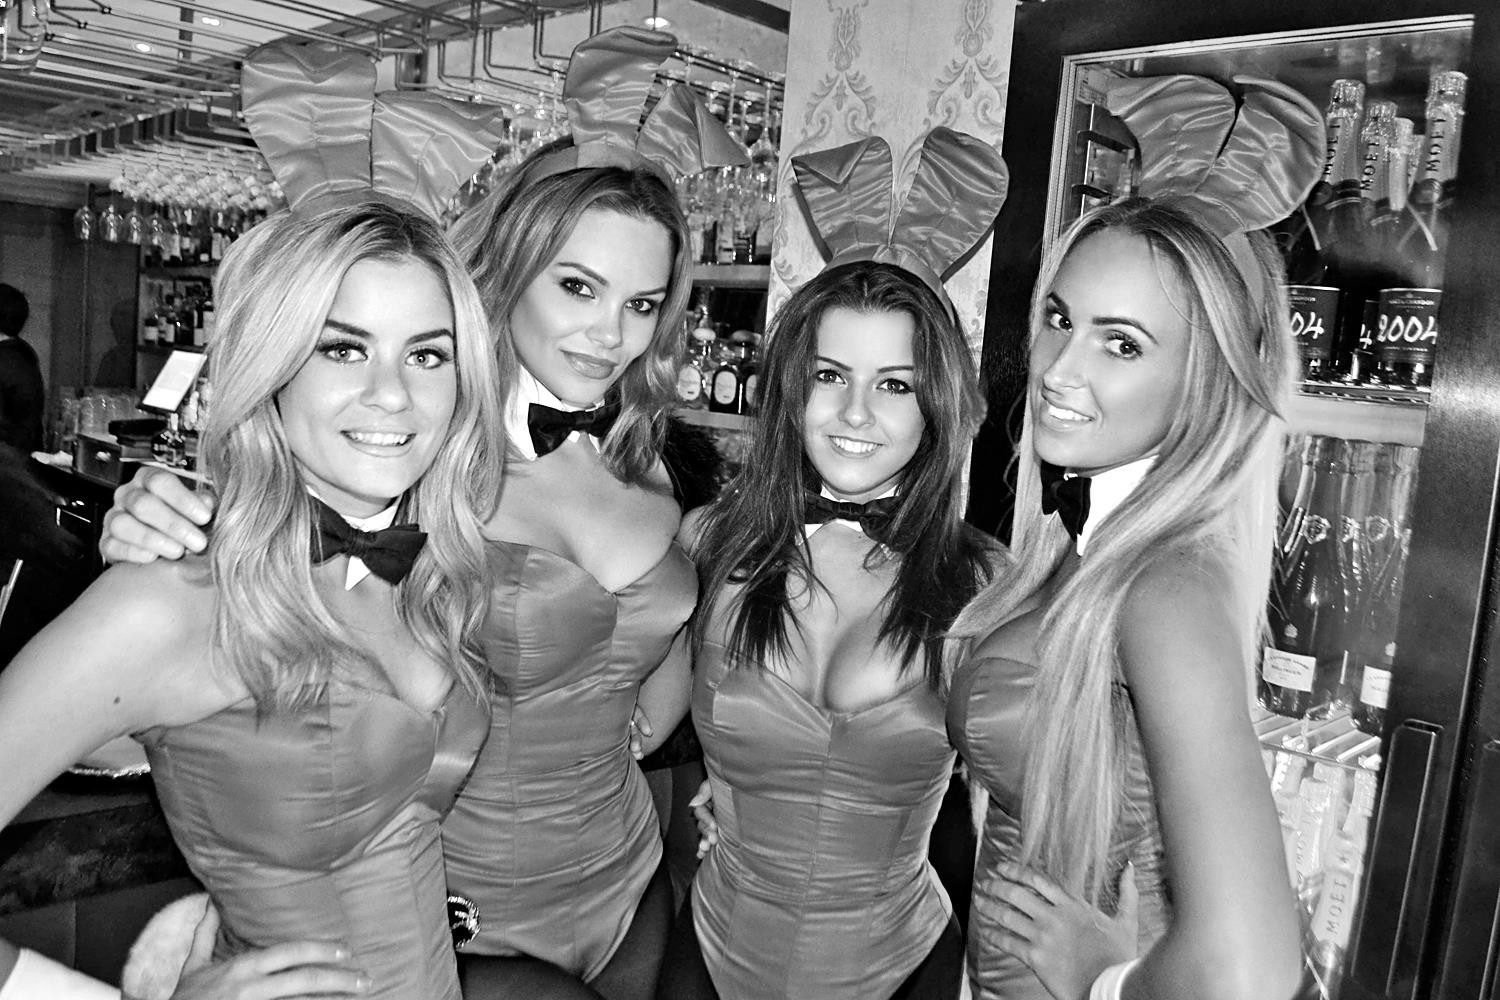 People 1500x1000 monochrome bunny suit Playboy women group of women bunny ears looking at viewer smiling boobs